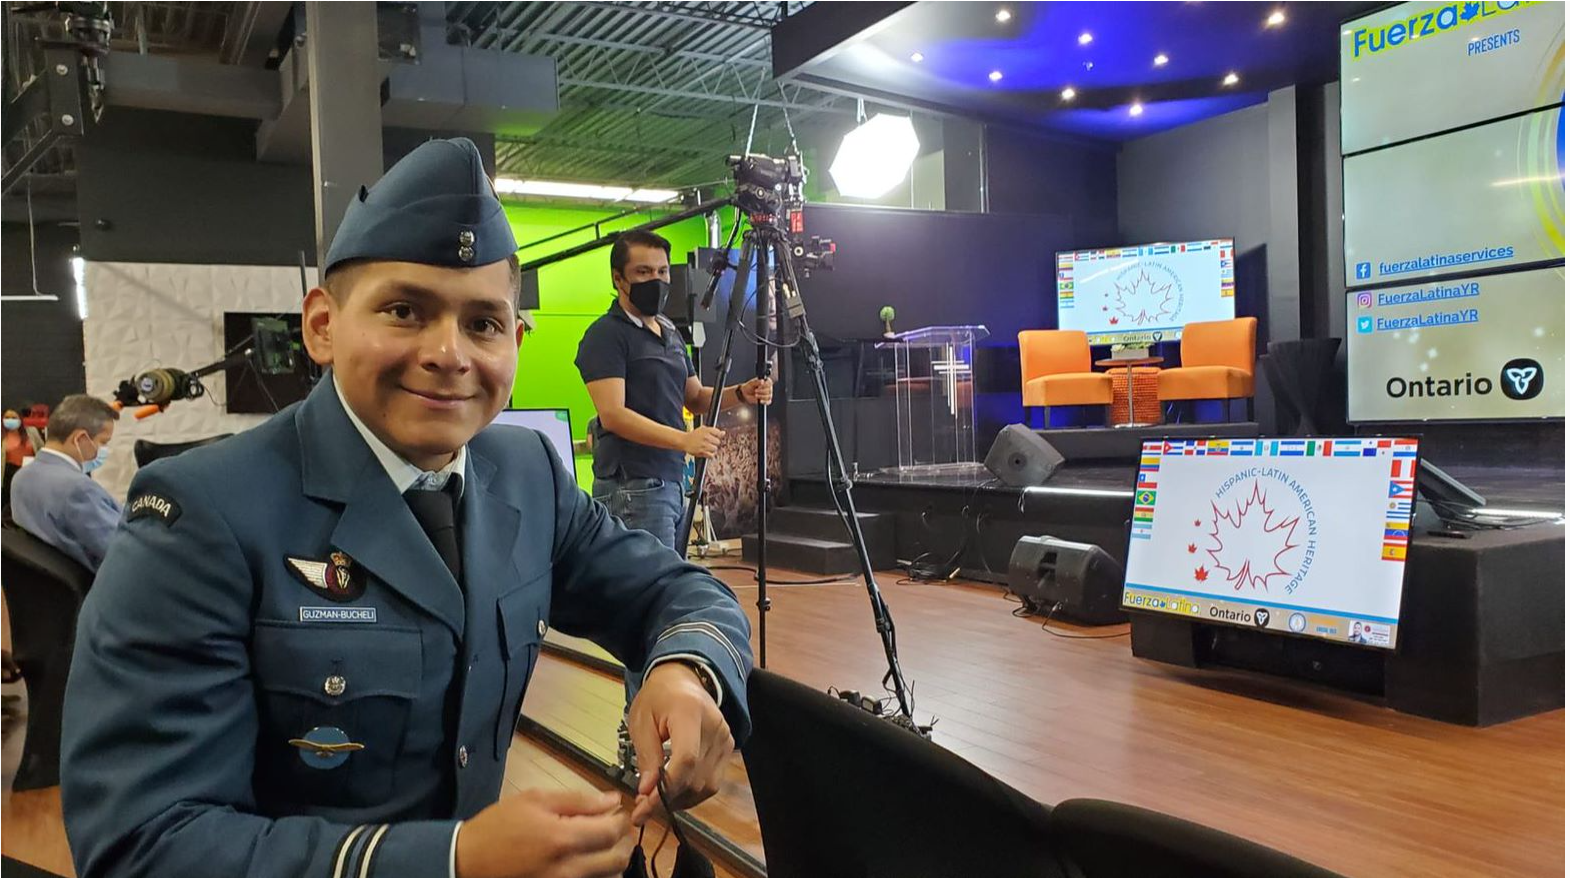 The smile behind the mask: Captain Rogger Guzman-Bucheli, a Communication Electronics Engineering Officer with the RCAF, was recognized by Toronto-based volunteer organization Fuerza Latina for his CAF accomplishments and cultural contributions in October 2021. 